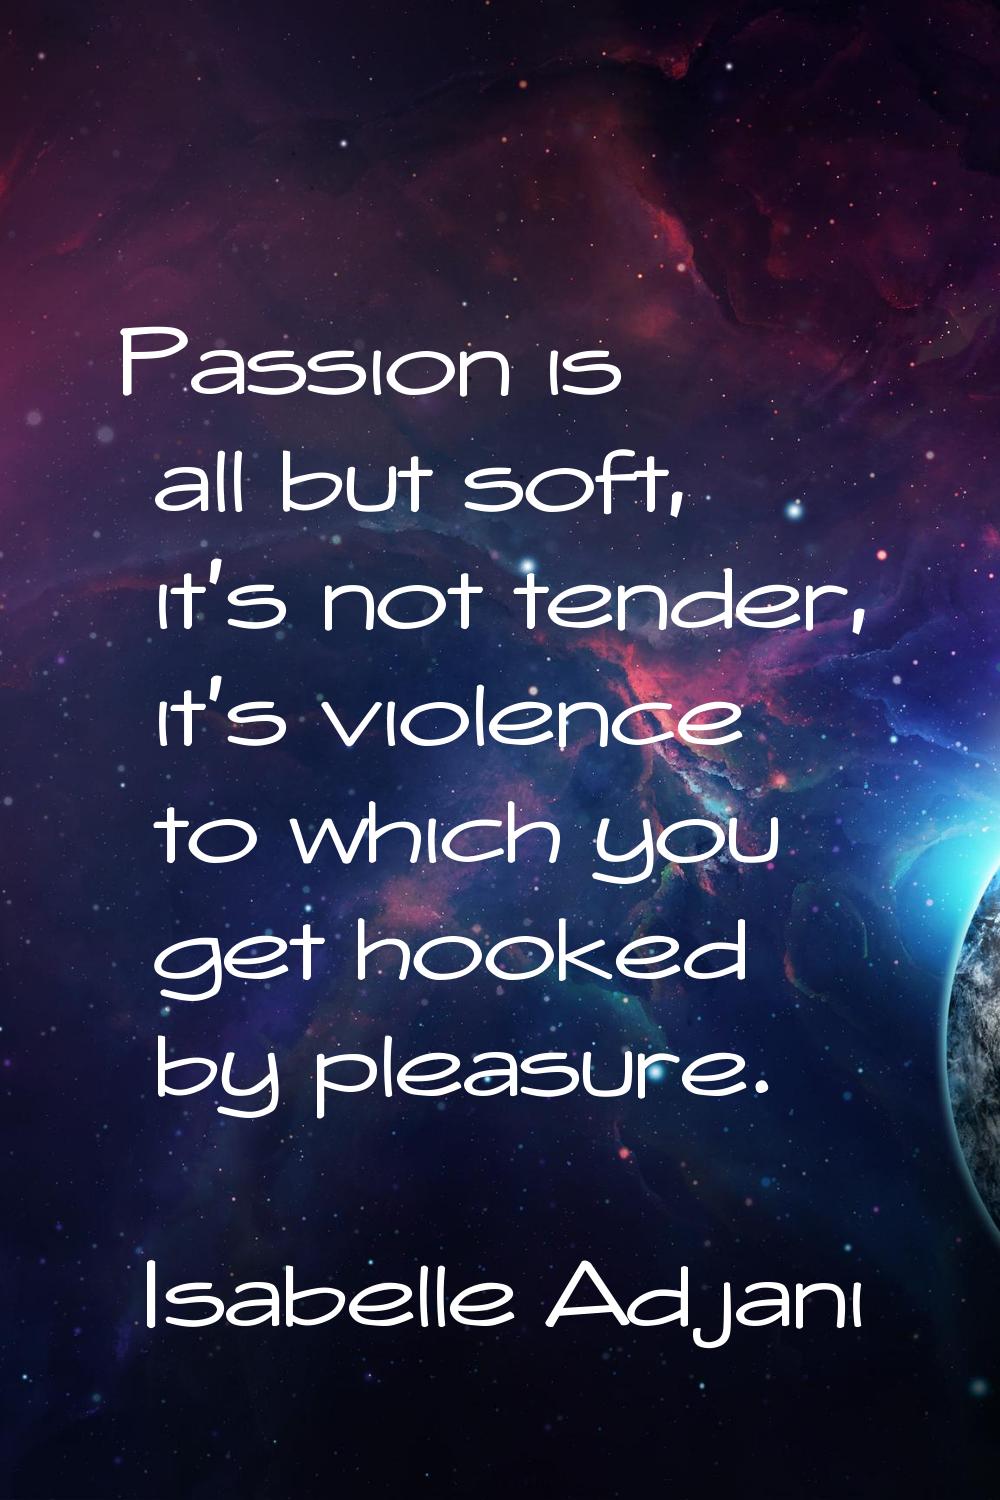 Passion is all but soft, it's not tender, it's violence to which you get hooked by pleasure.